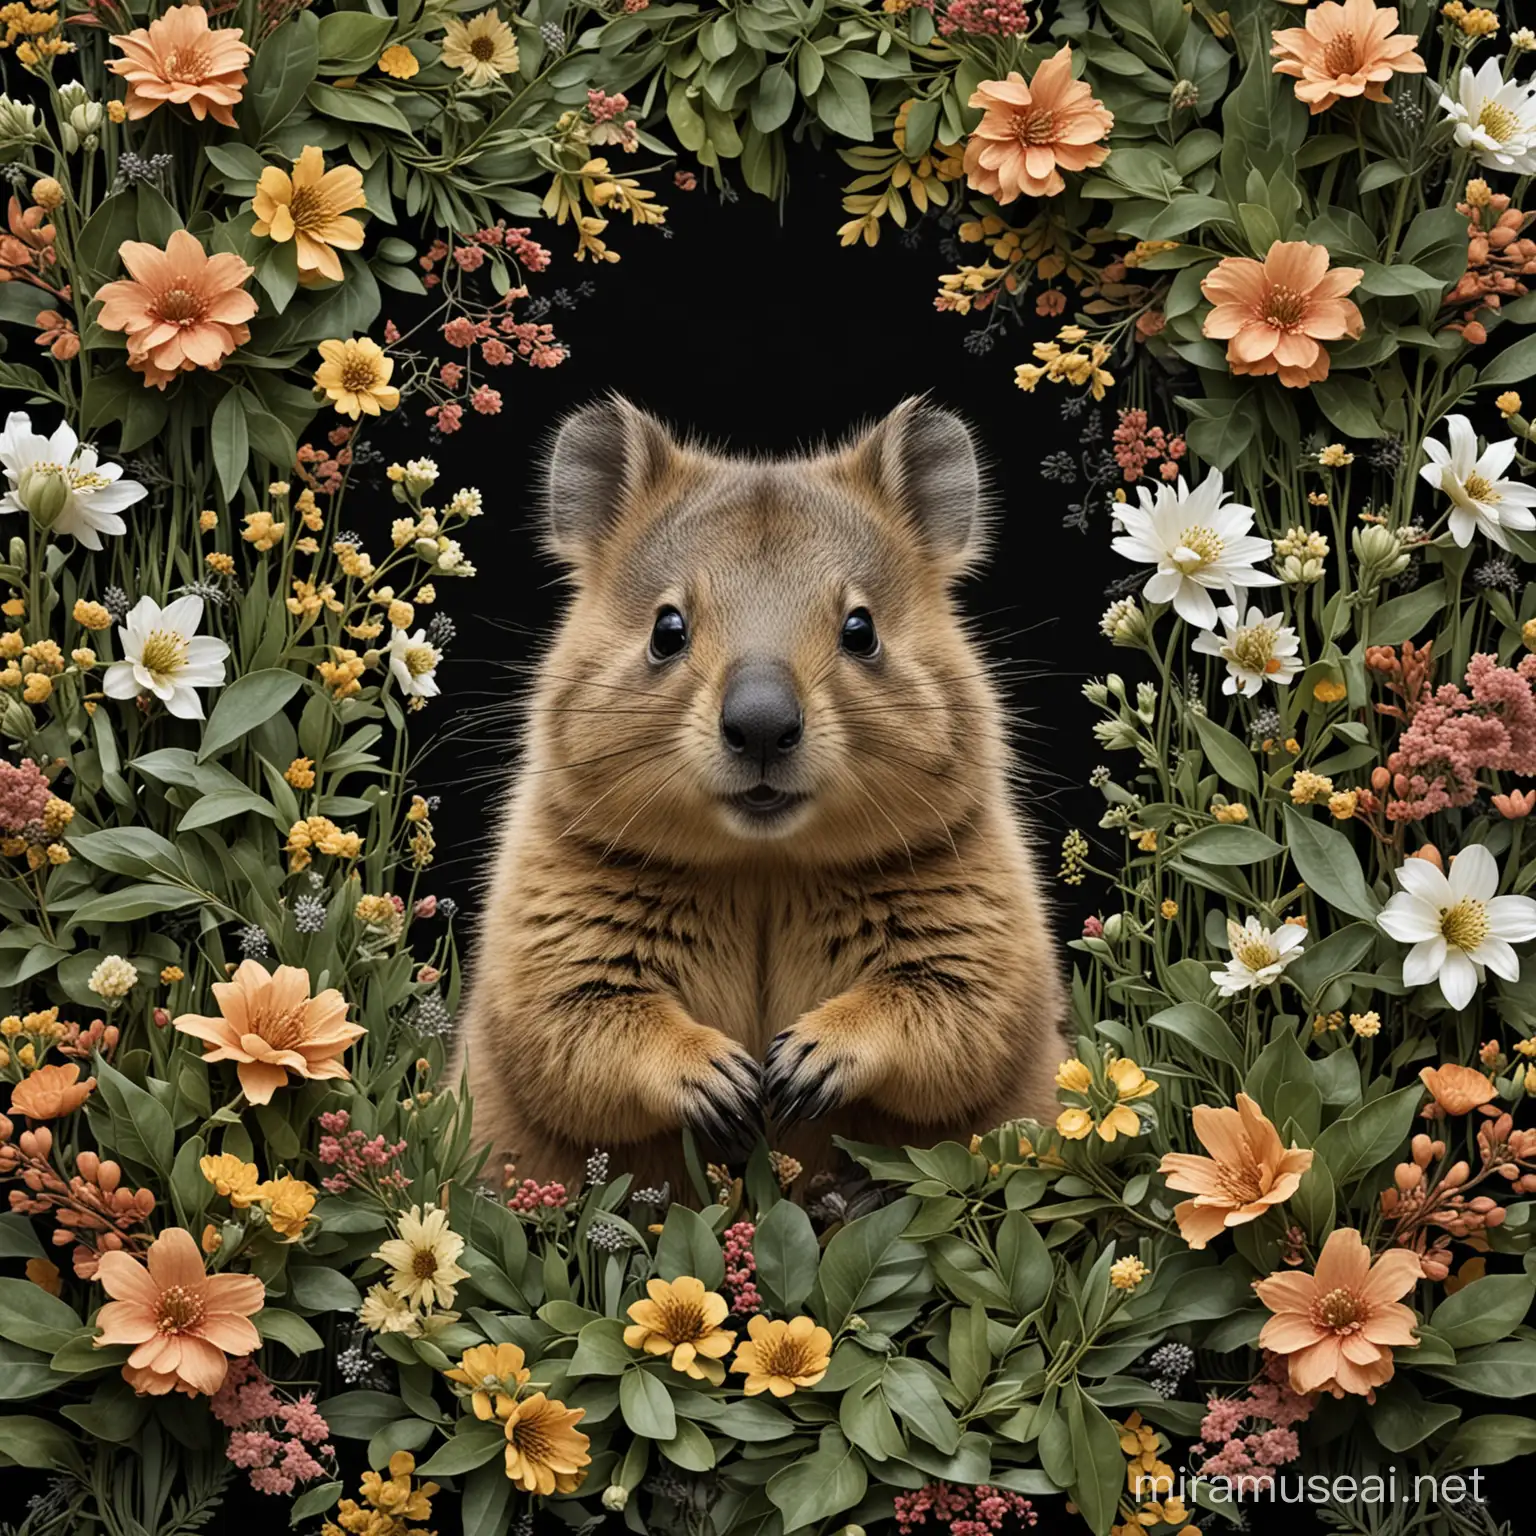 give me super realistic contrast of quokka surround with crowded flower and leaf environment at the center of image with super black jet background for water screen printing 